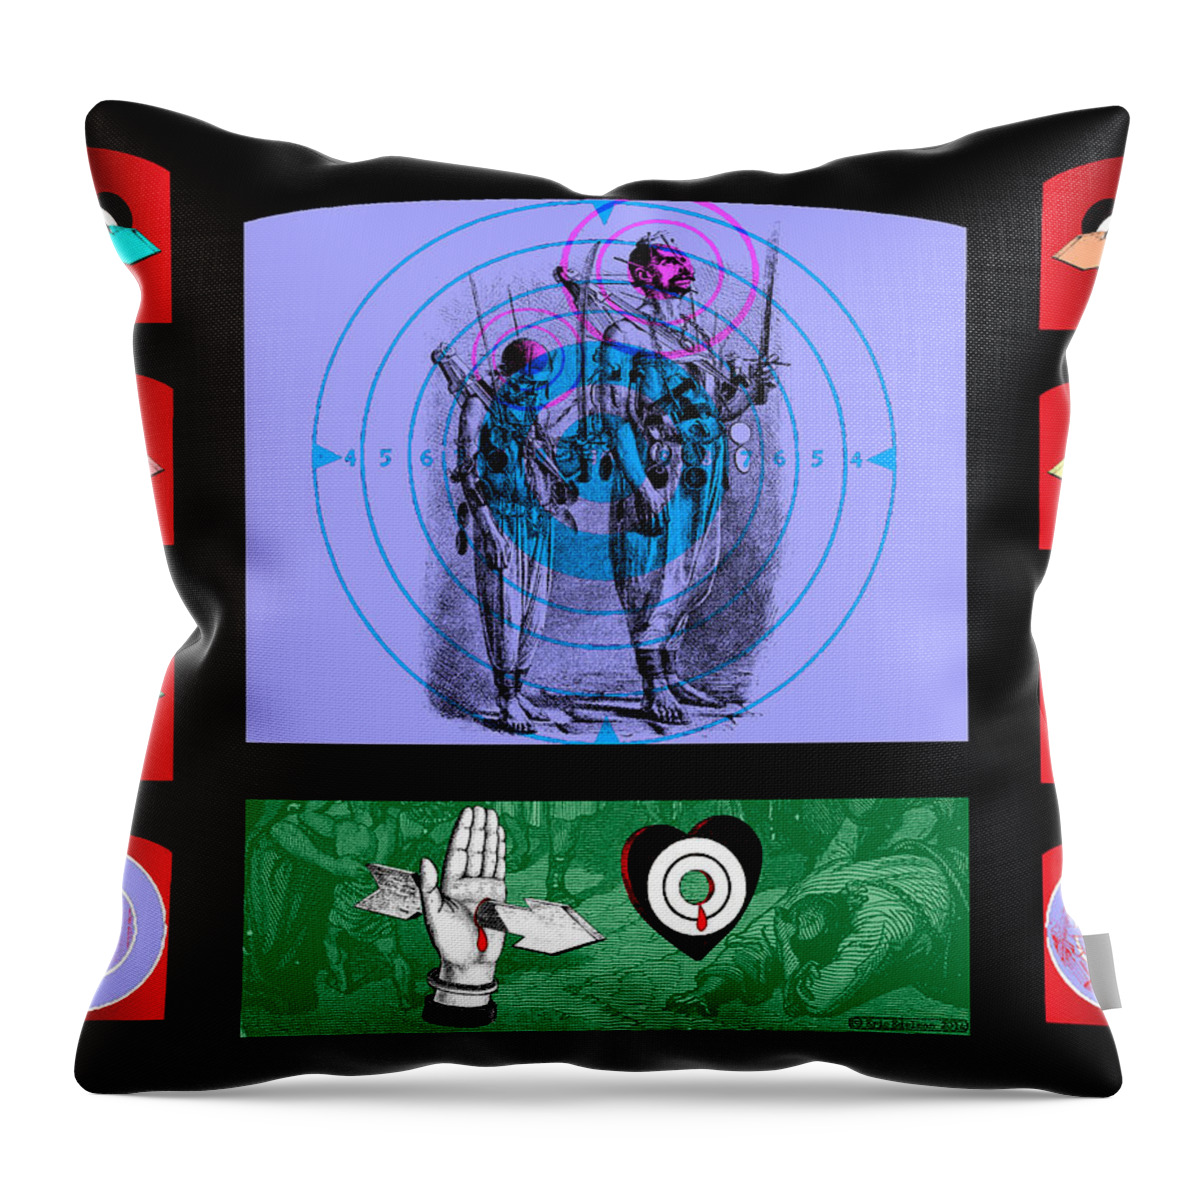 Digital Collage Throw Pillow featuring the digital art Shooting Gallery IV by Eric Edelman